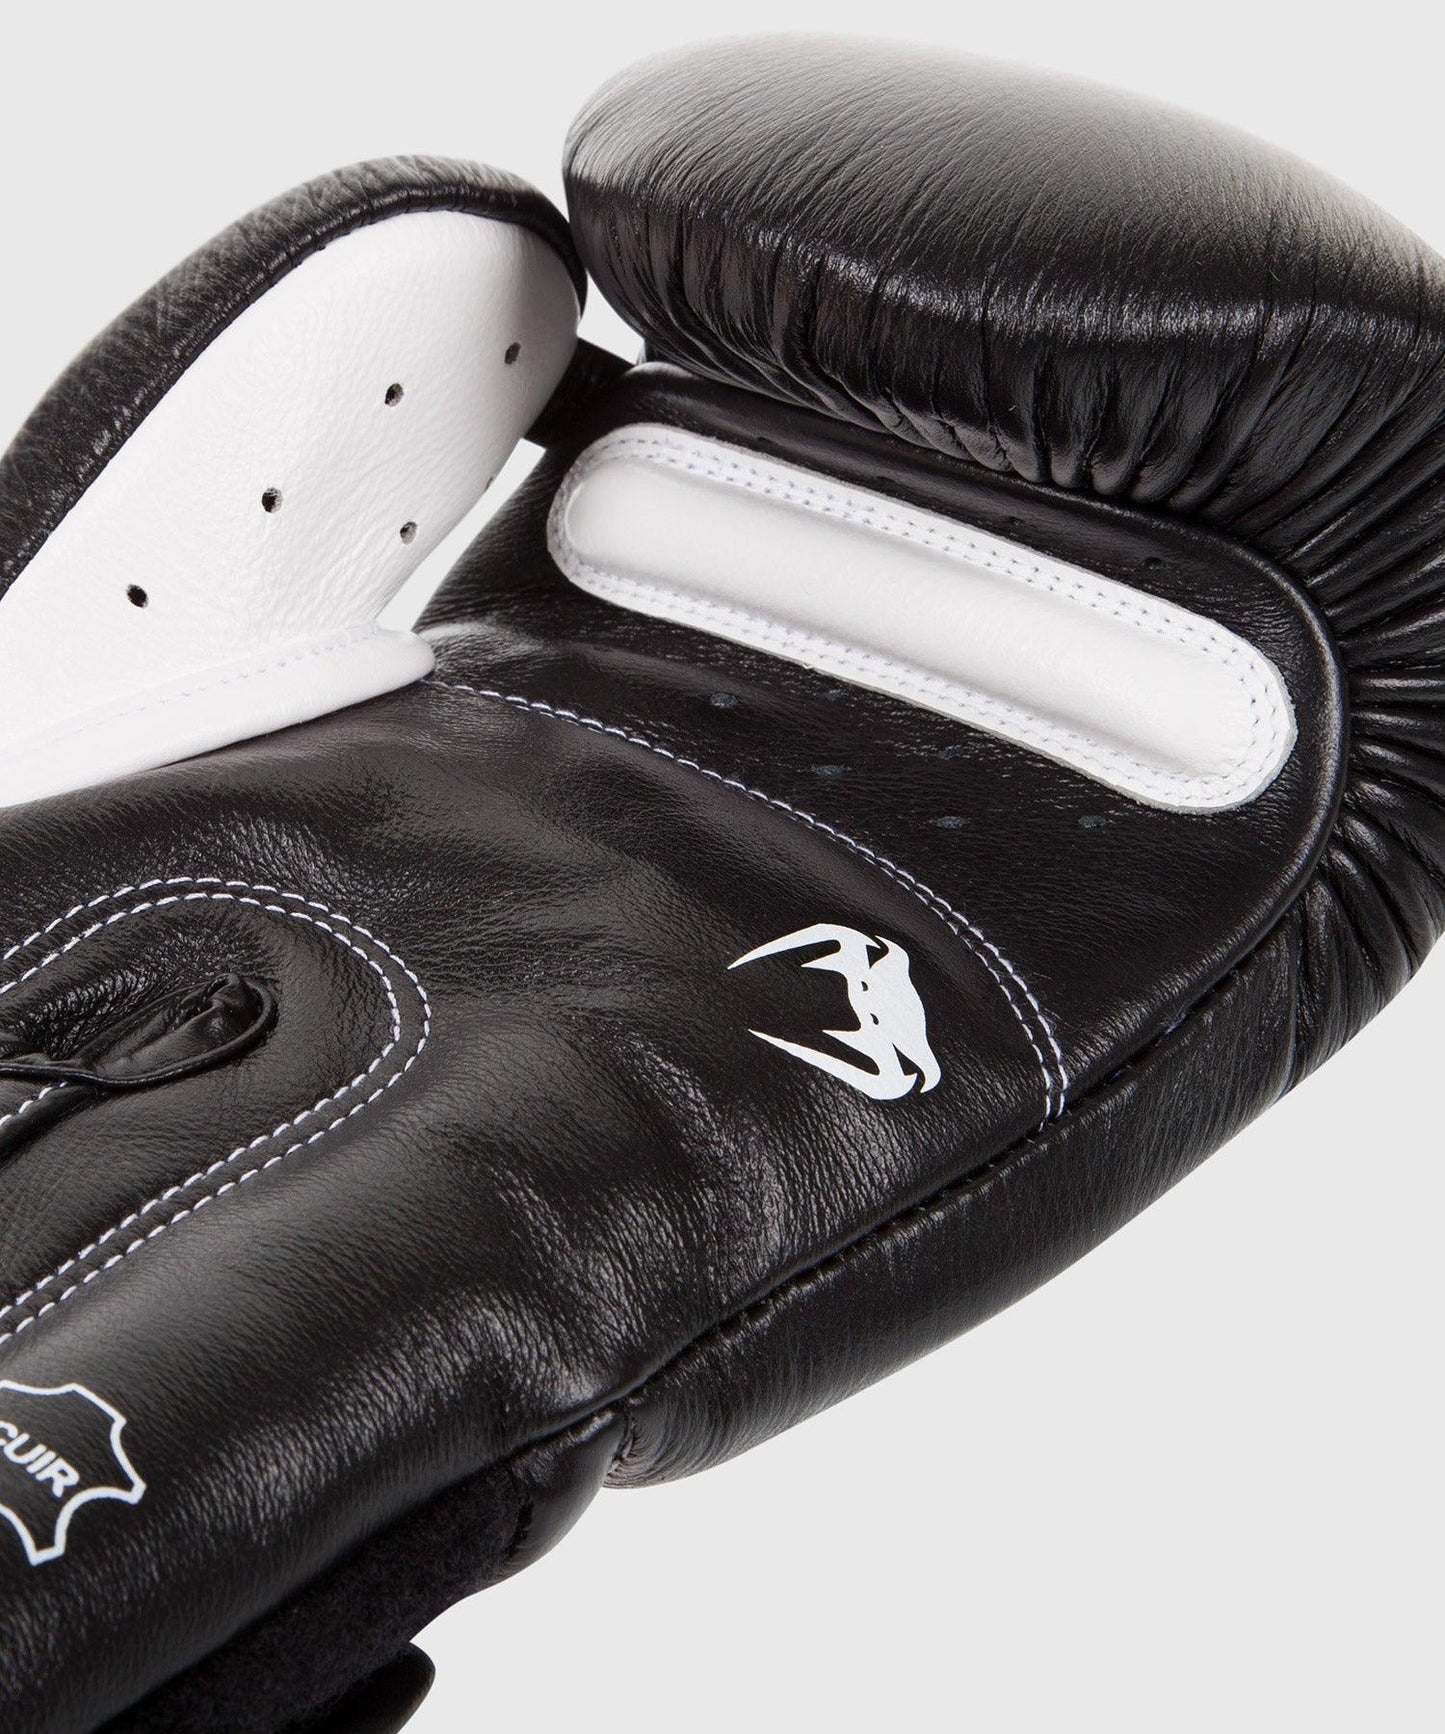 Venum Giant 3.0 Boxing Gloves - Nappa Leather - Black Picture 3